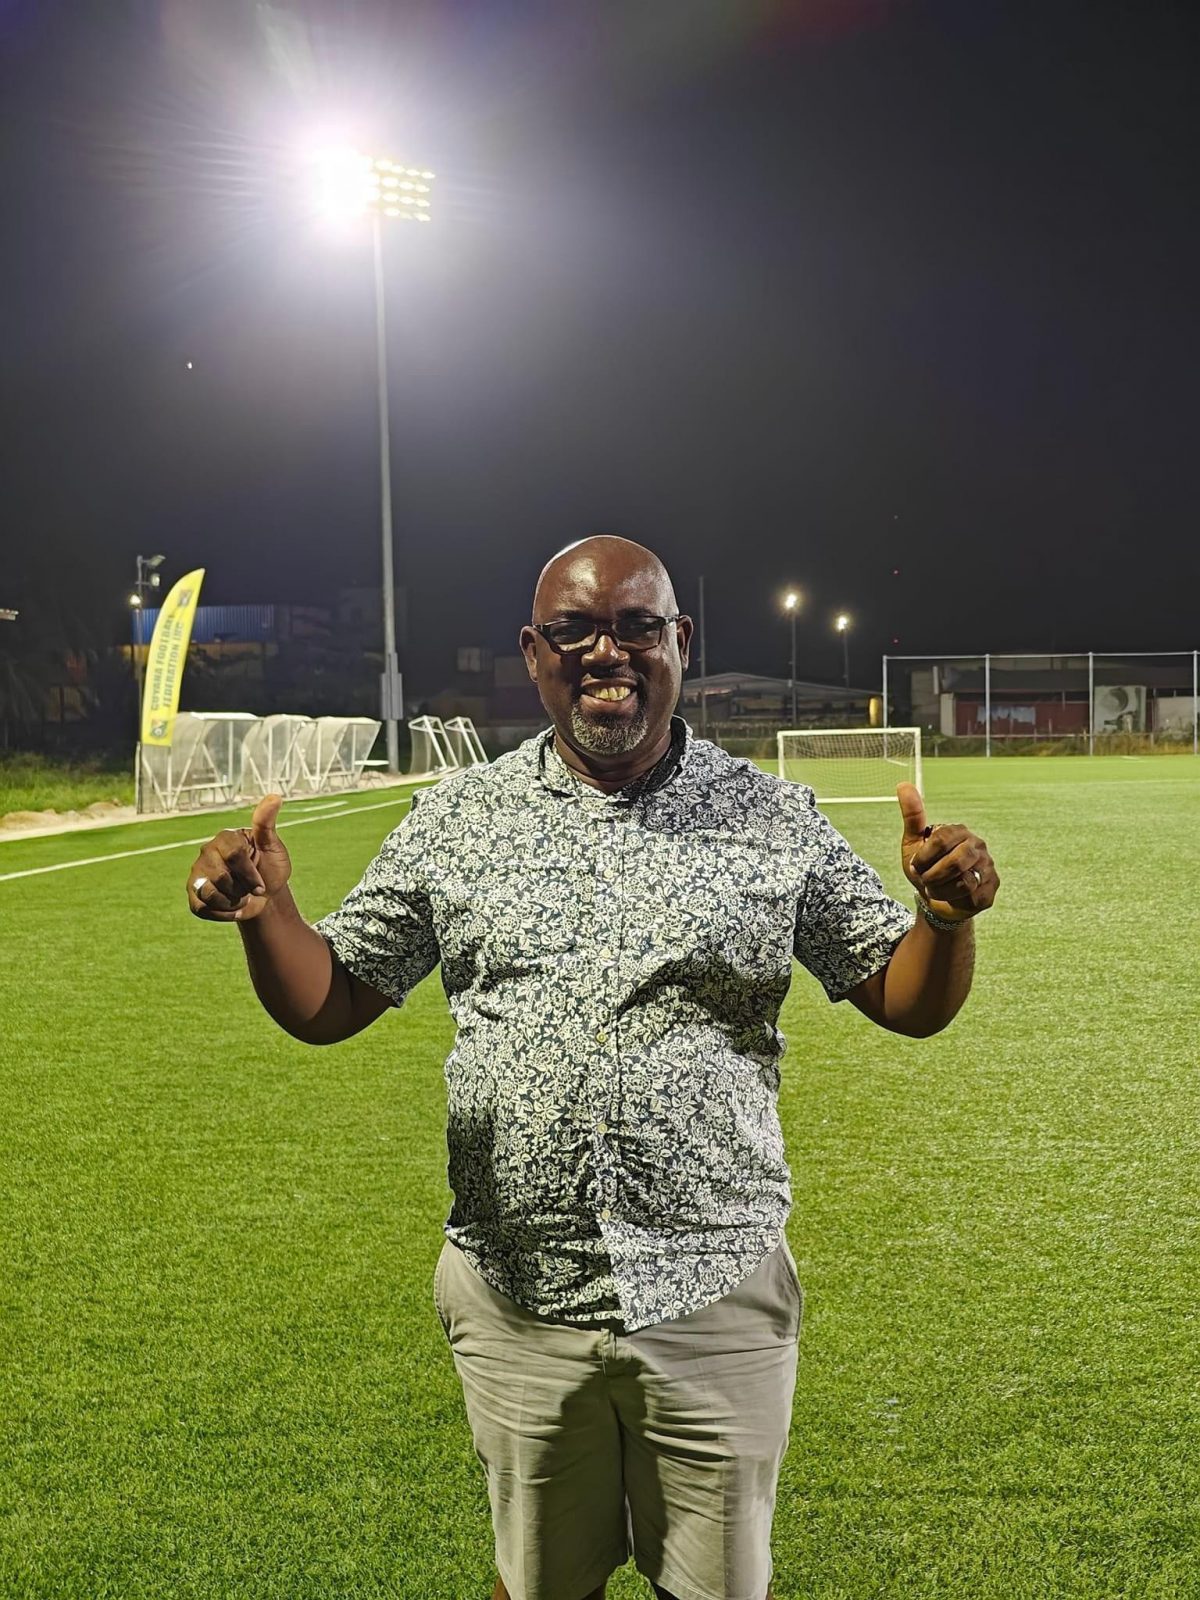 GFF Vice President Rawlston Adams gives the thumbs up during the lighting test at the National Training Centre in Providence.